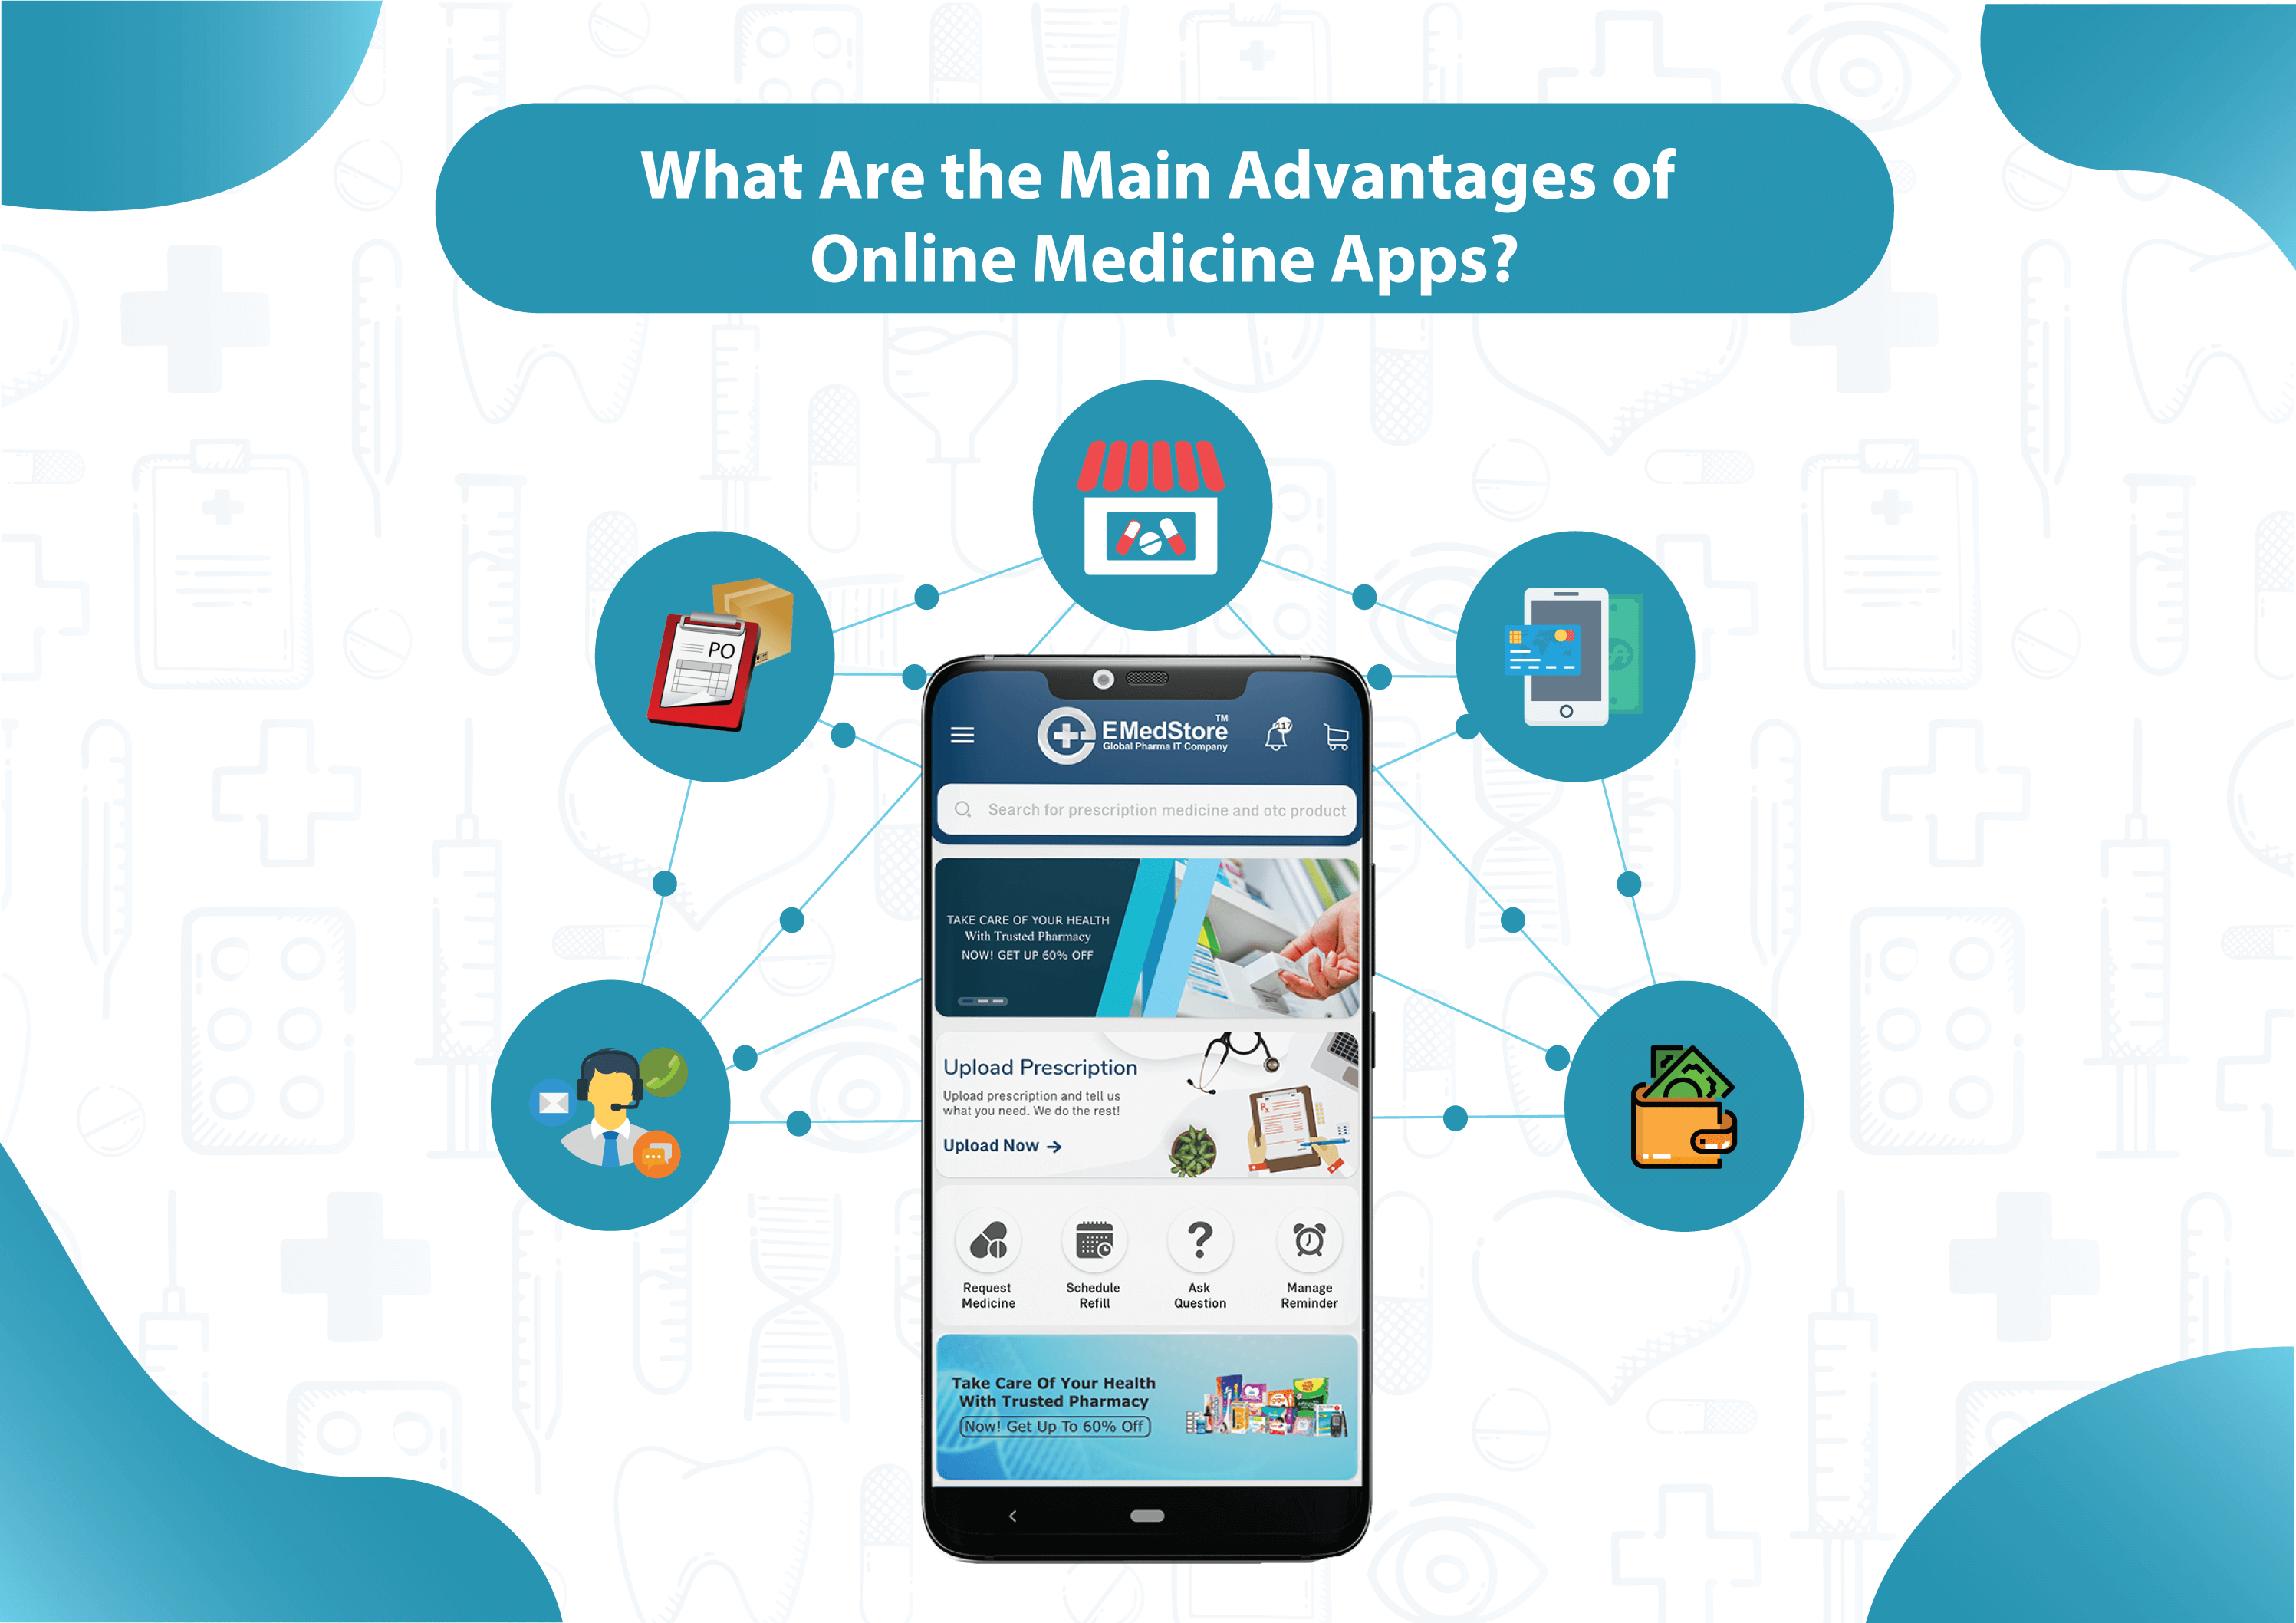 what are the main advantages of online medicine apps?